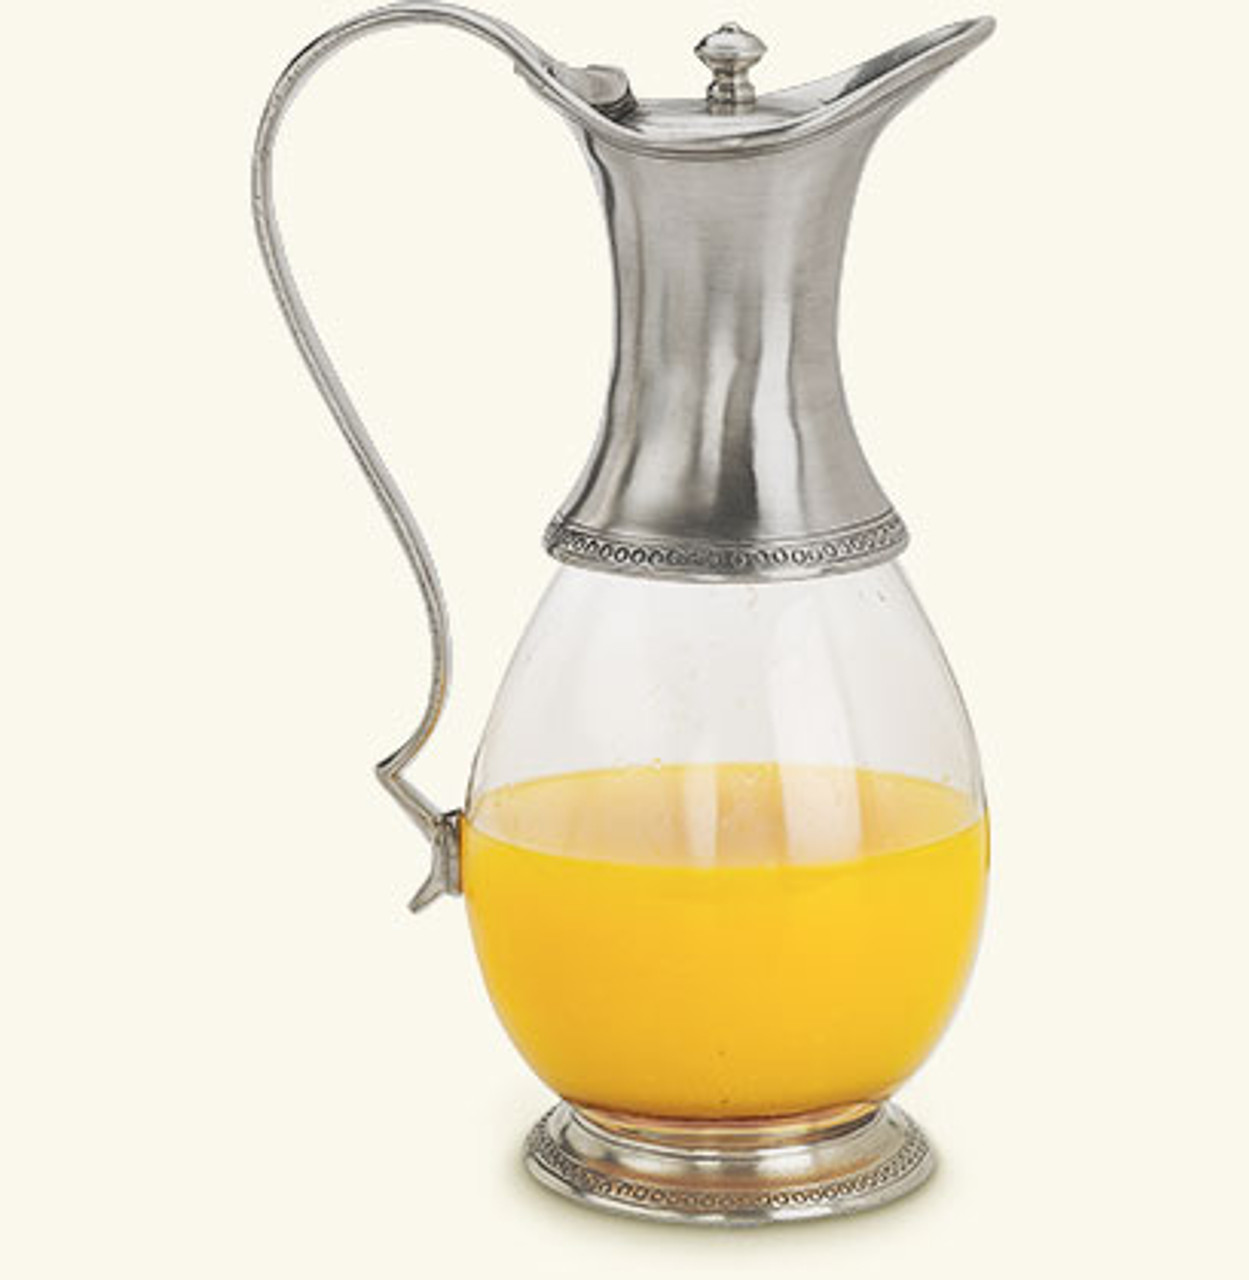 https://cdn11.bigcommerce.com/s-e0xlh4avpe/images/stencil/1280x1280/products/104087/137500/match-italian-pewter-glass-pitcher-with-lid-26__45852.1650937482.jpg?c=1